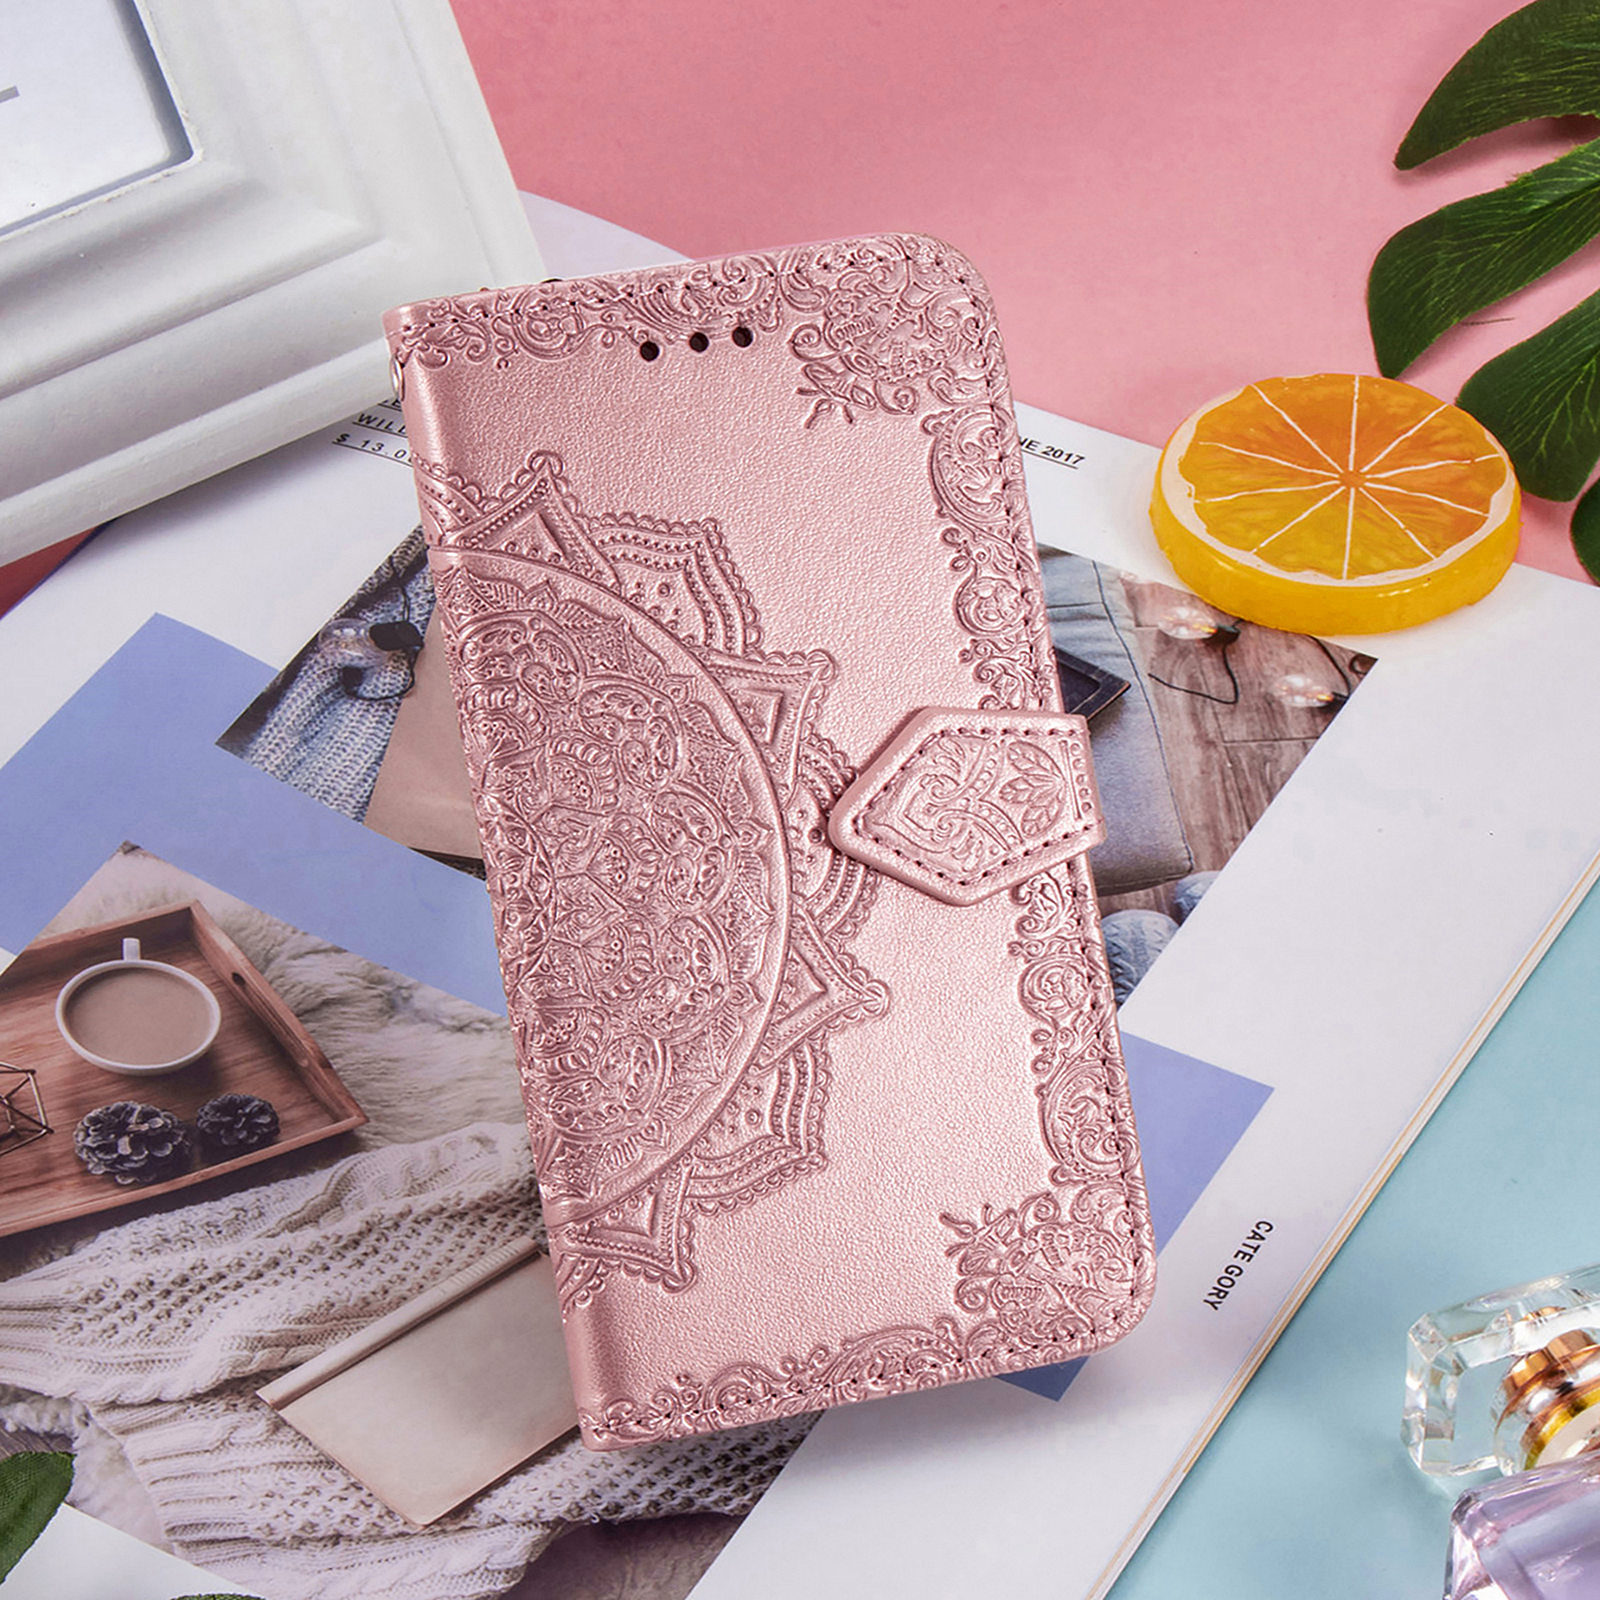 casing Xiaomi Redmi note 6 pro note 7 Mi Poco phone F1 max 3 8 lite 9 se play Phone case Mandala flower Bumper PU Flip Leather Protective Support Cover Wallet card slot blue pink gray purple green black Magnetic